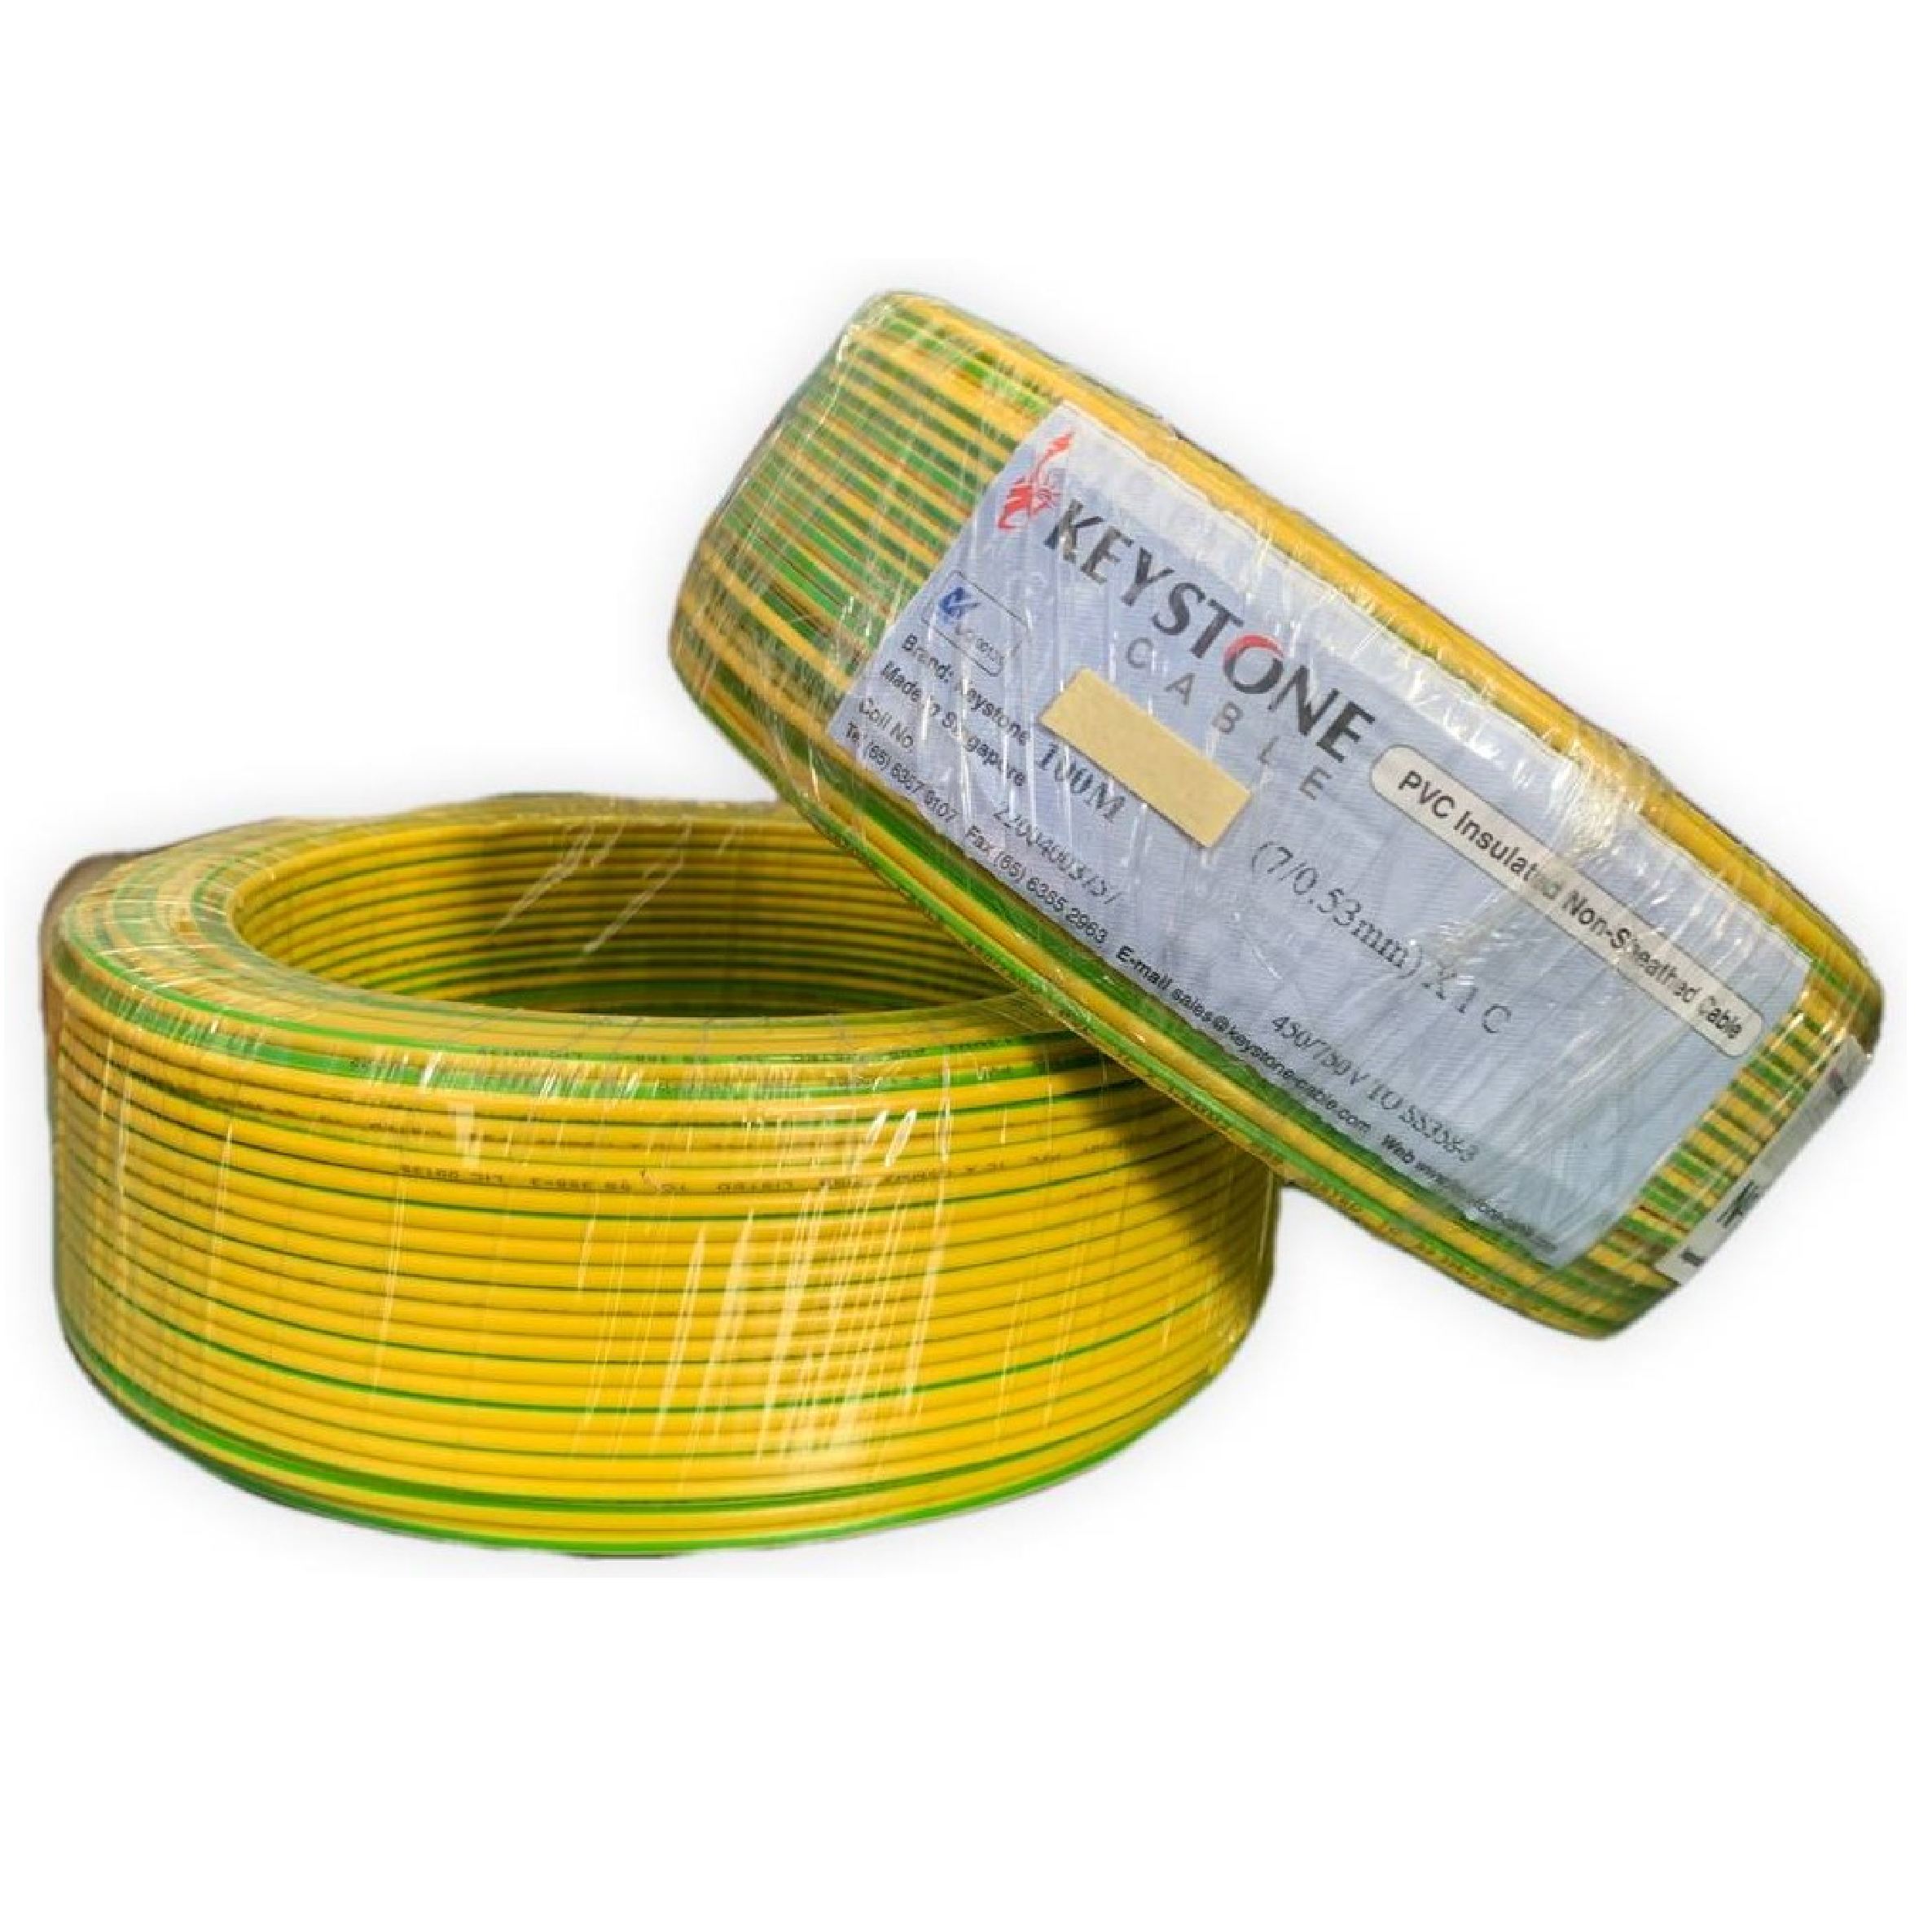 KEYSTONE YELLOW/GREEN PVC Insulated Non-Sheathed Cable 6.0mm2 450/750V X 100Metres